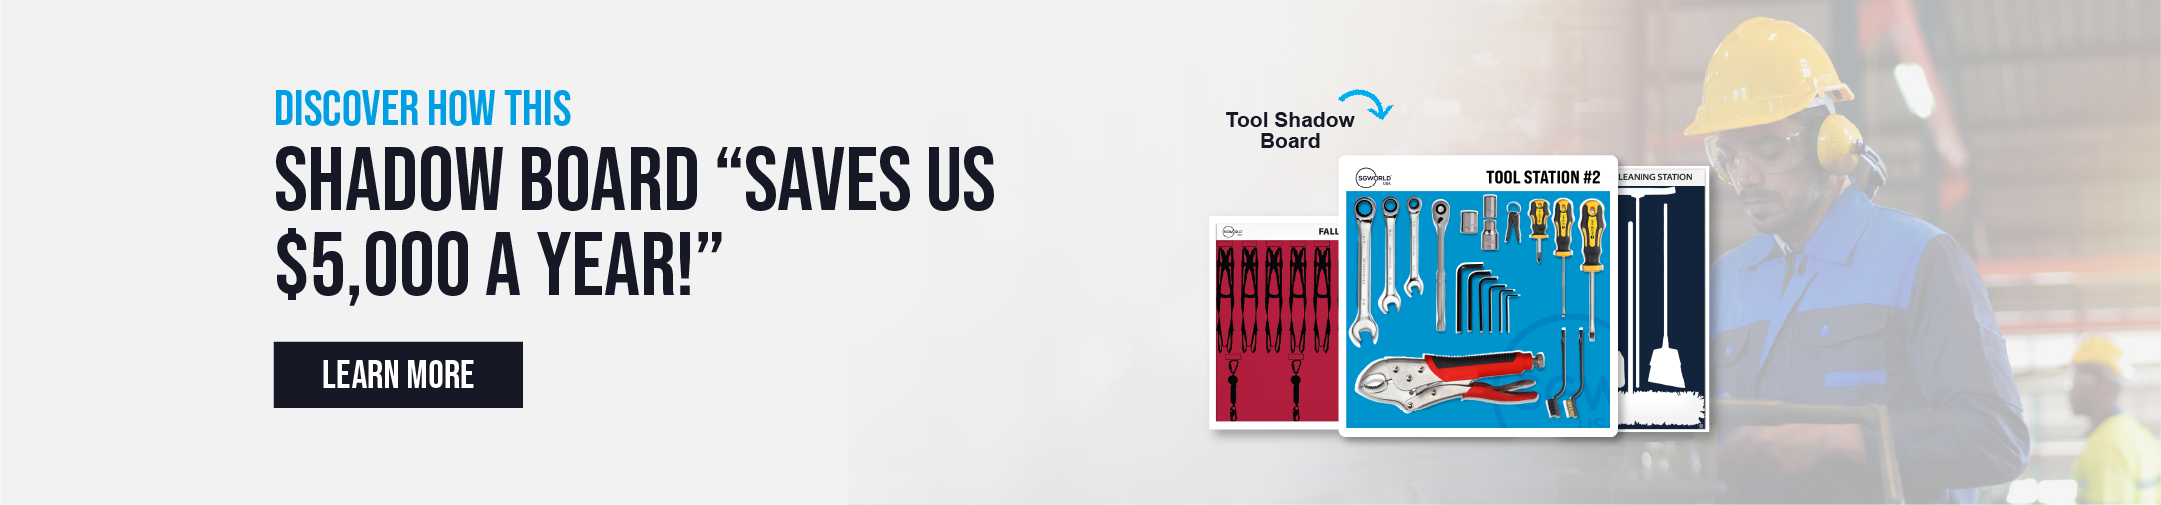 discover how this shadow board saves us $5000 a year.